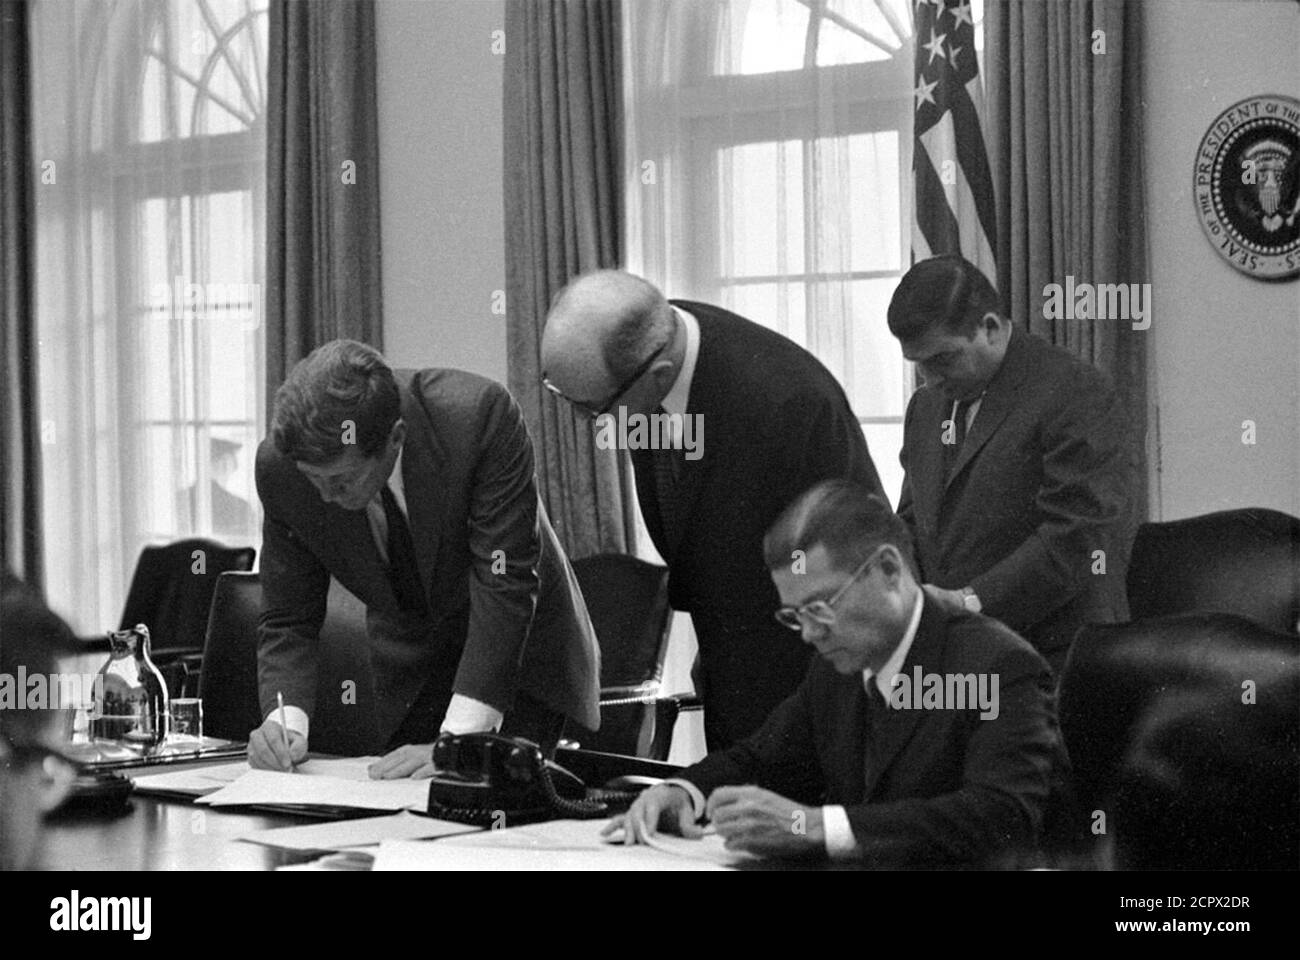 Cuban Missile Crisis. President John F Kennedy, Secretary of State Dean Rusk, Secretary of Defense Robert S. McNamara (seated), and White House Press Secretary Pierre Salinger in the Cabinet Office in October 1962, at a meeting of EXCOMM to discuss the crisis in Cuba. Stock Photo